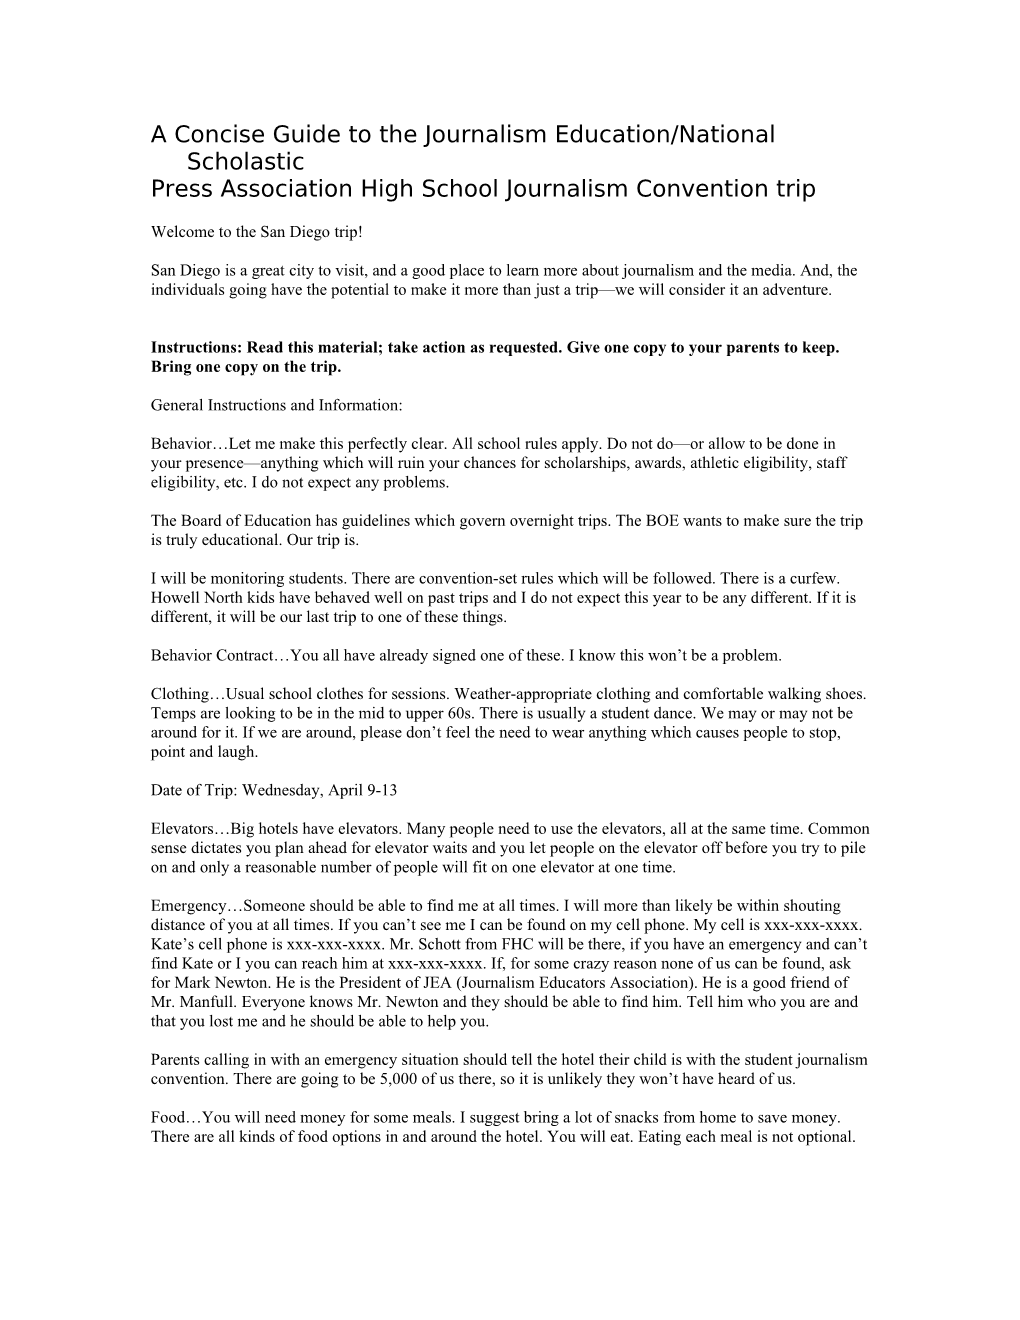 A Concise Guide to the Journalism Education/National Scholastic Press High School Journalism